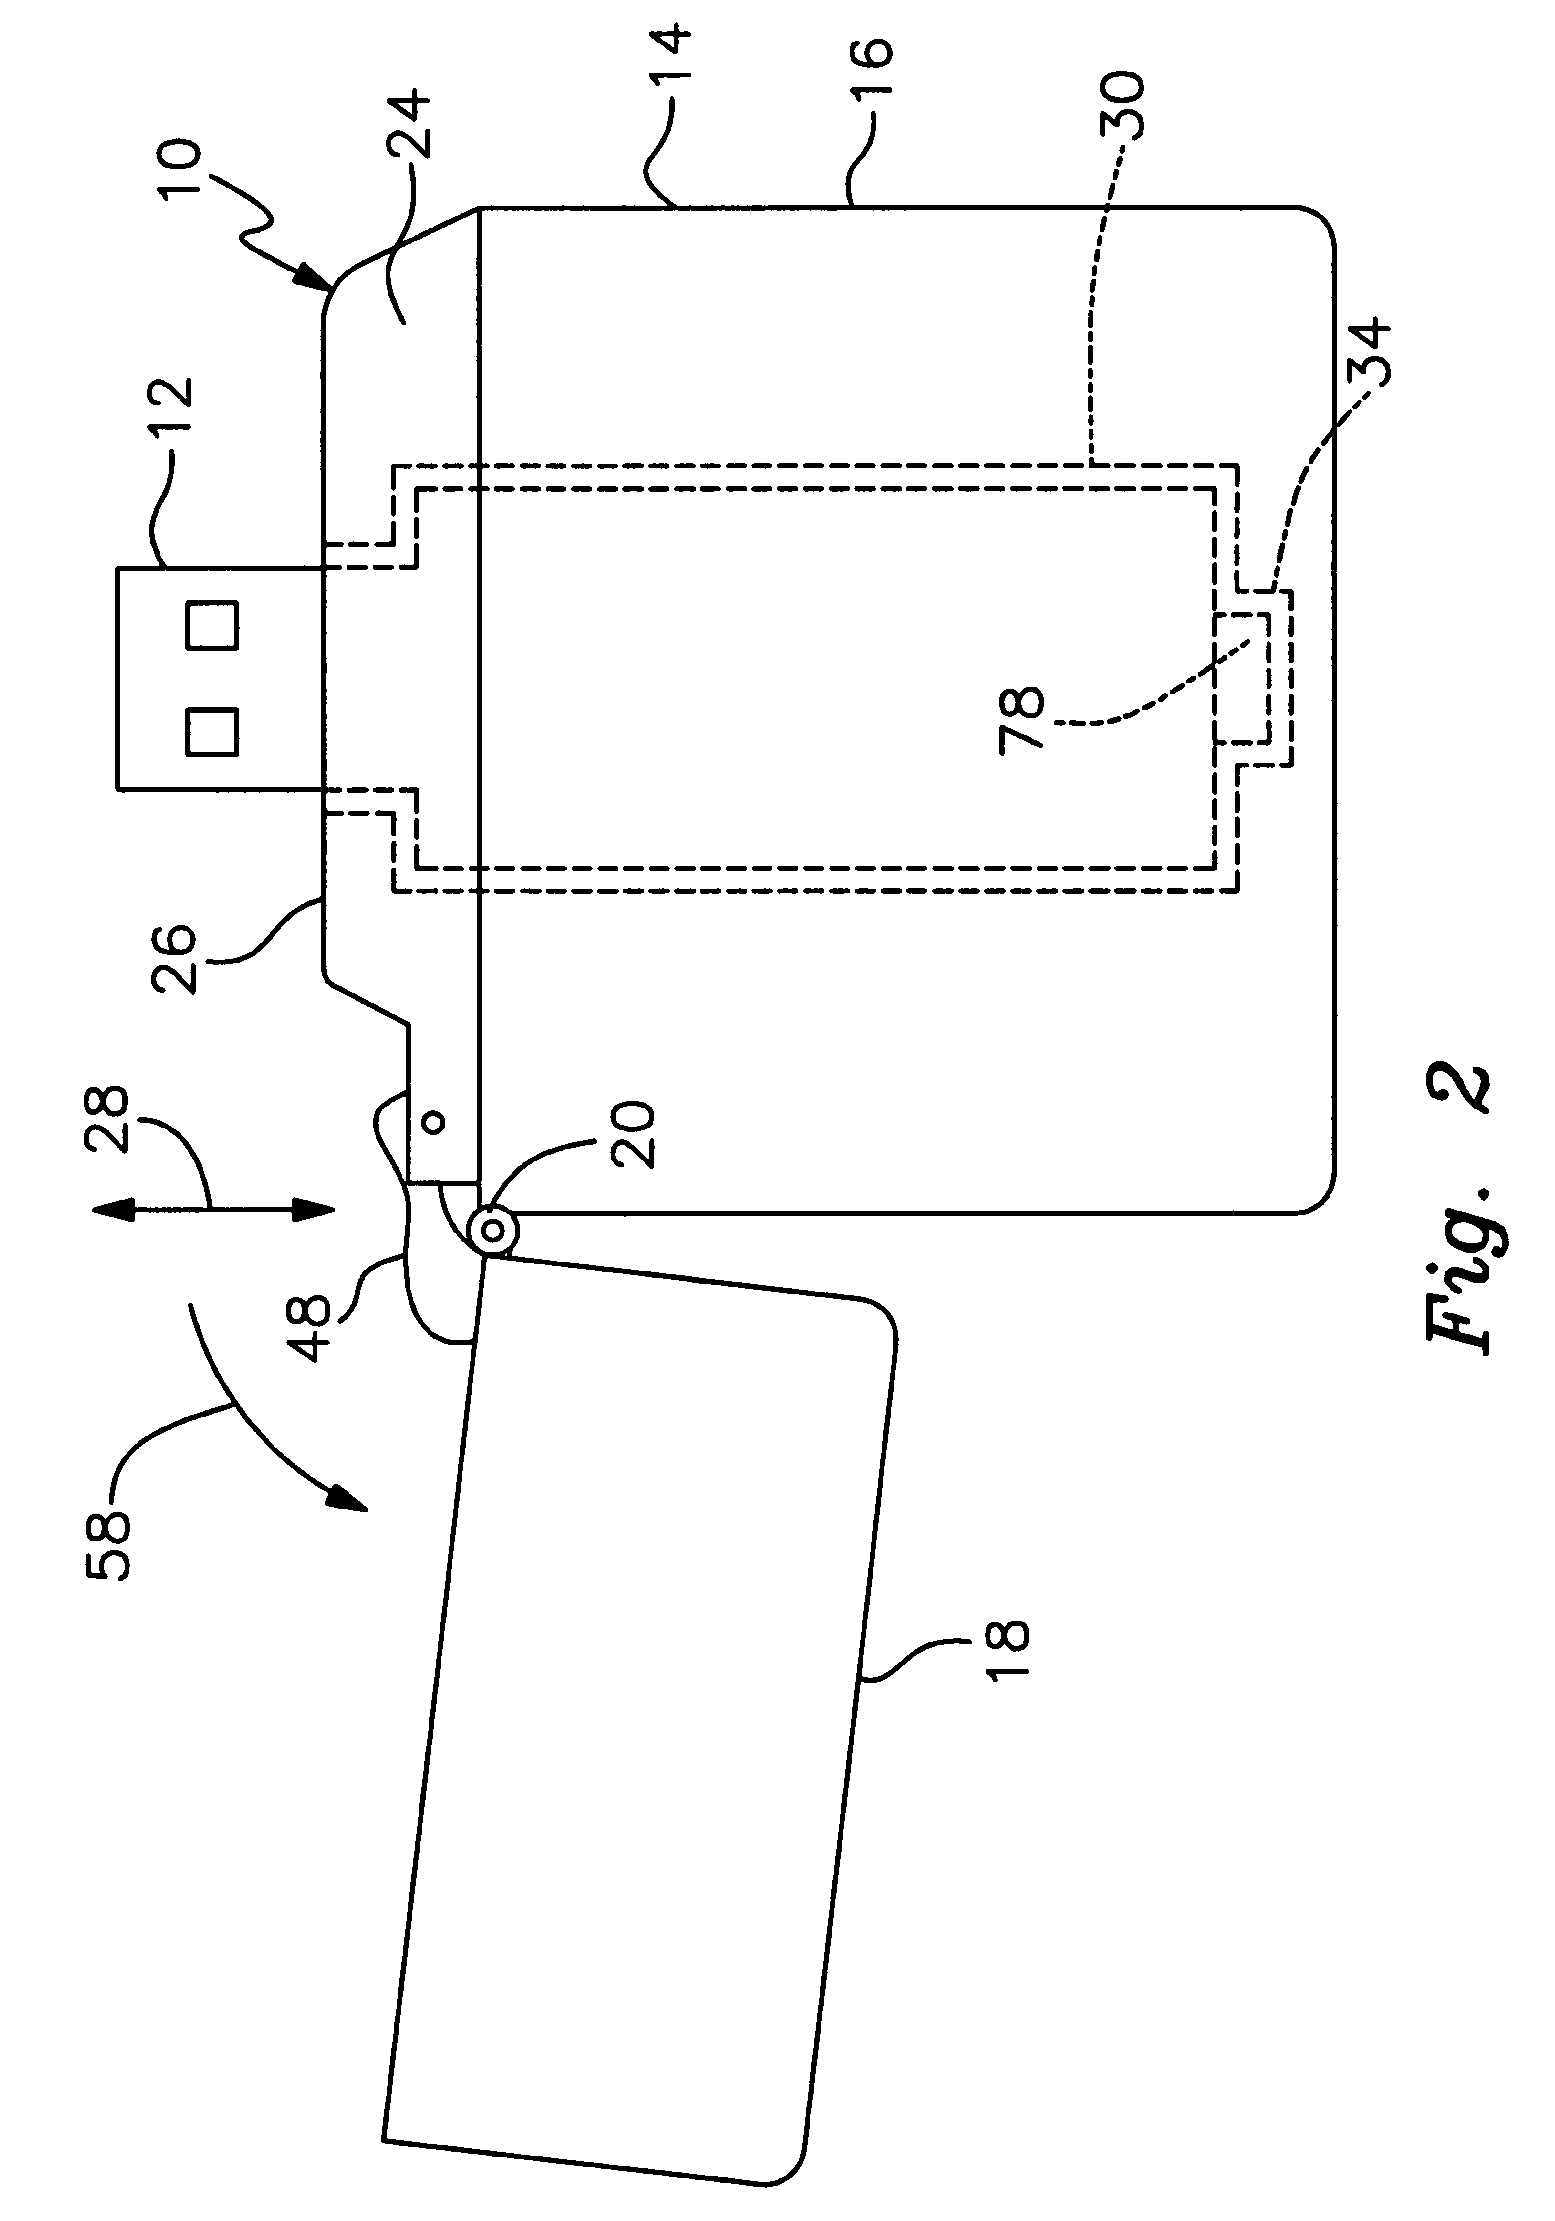 Protective enclosure for an electronic data storage device